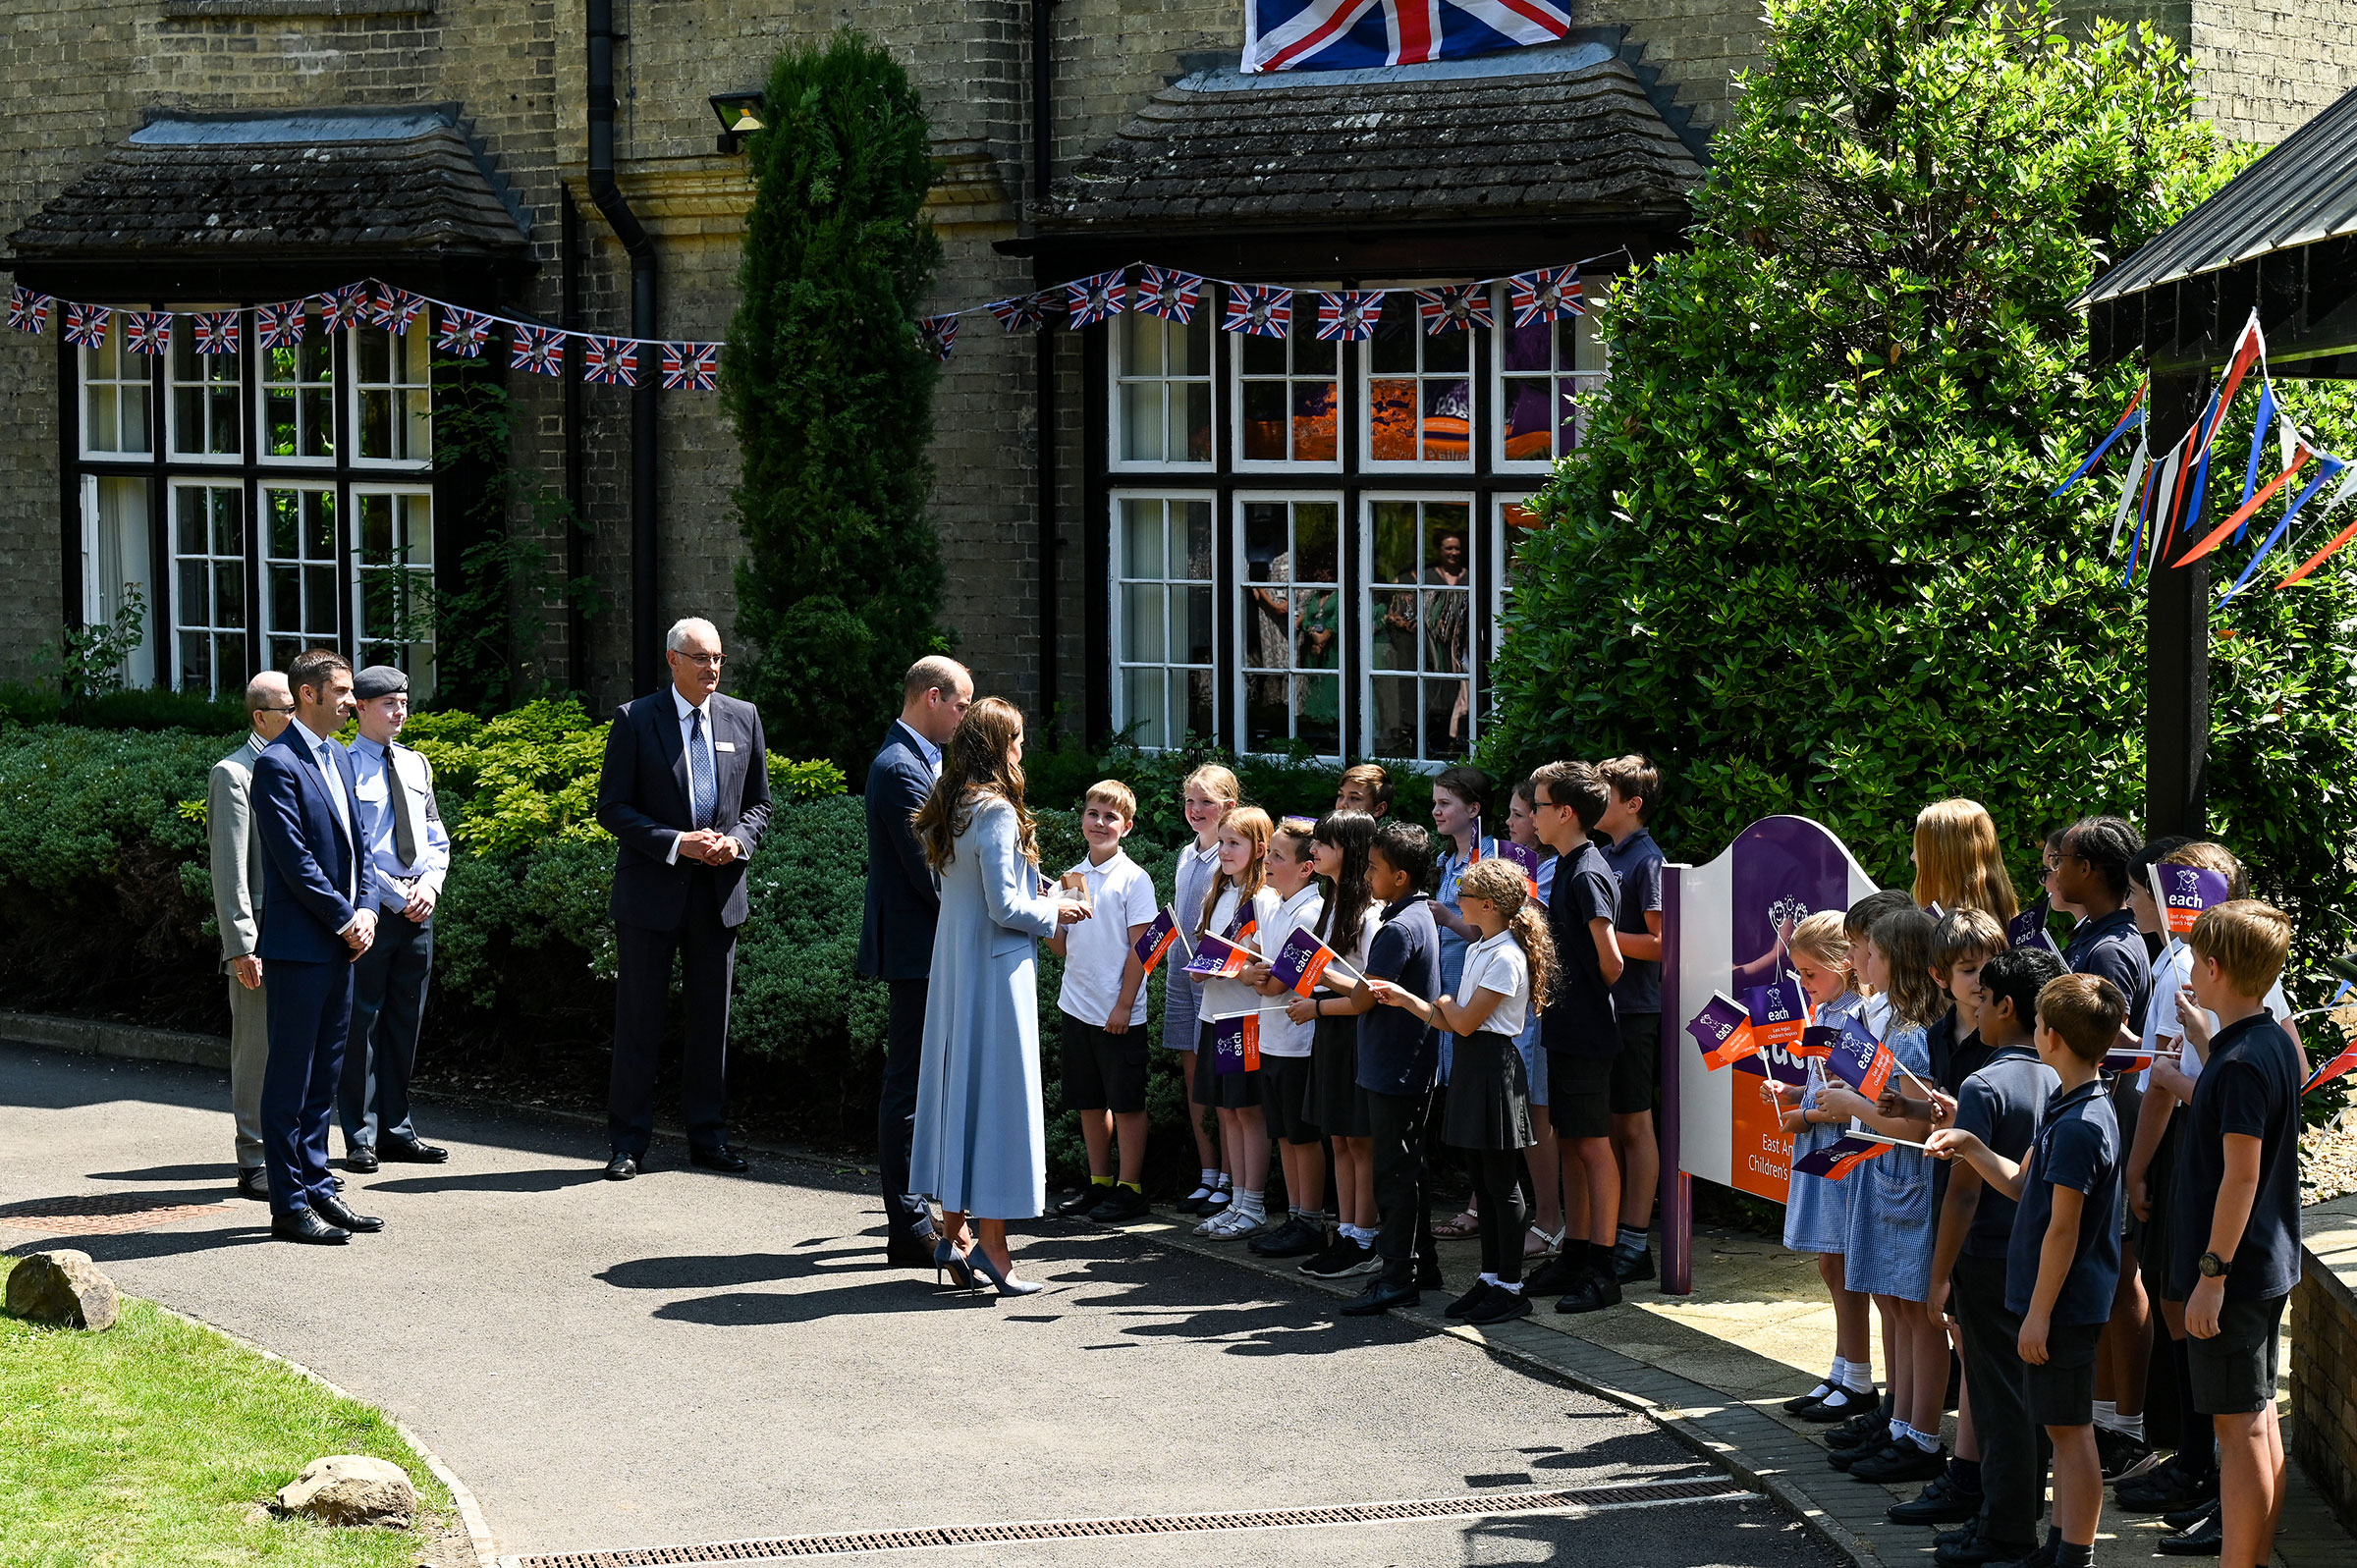 Prince William, Duke of Cambridge and Catherine, Duchess of Cambridge meet with children during a visit to East Anglia’s Children’s Hospice in Milton during an official visit to Cambridgeshire on June 23, 2022. (Stuart C. Wilson—Getty Images)